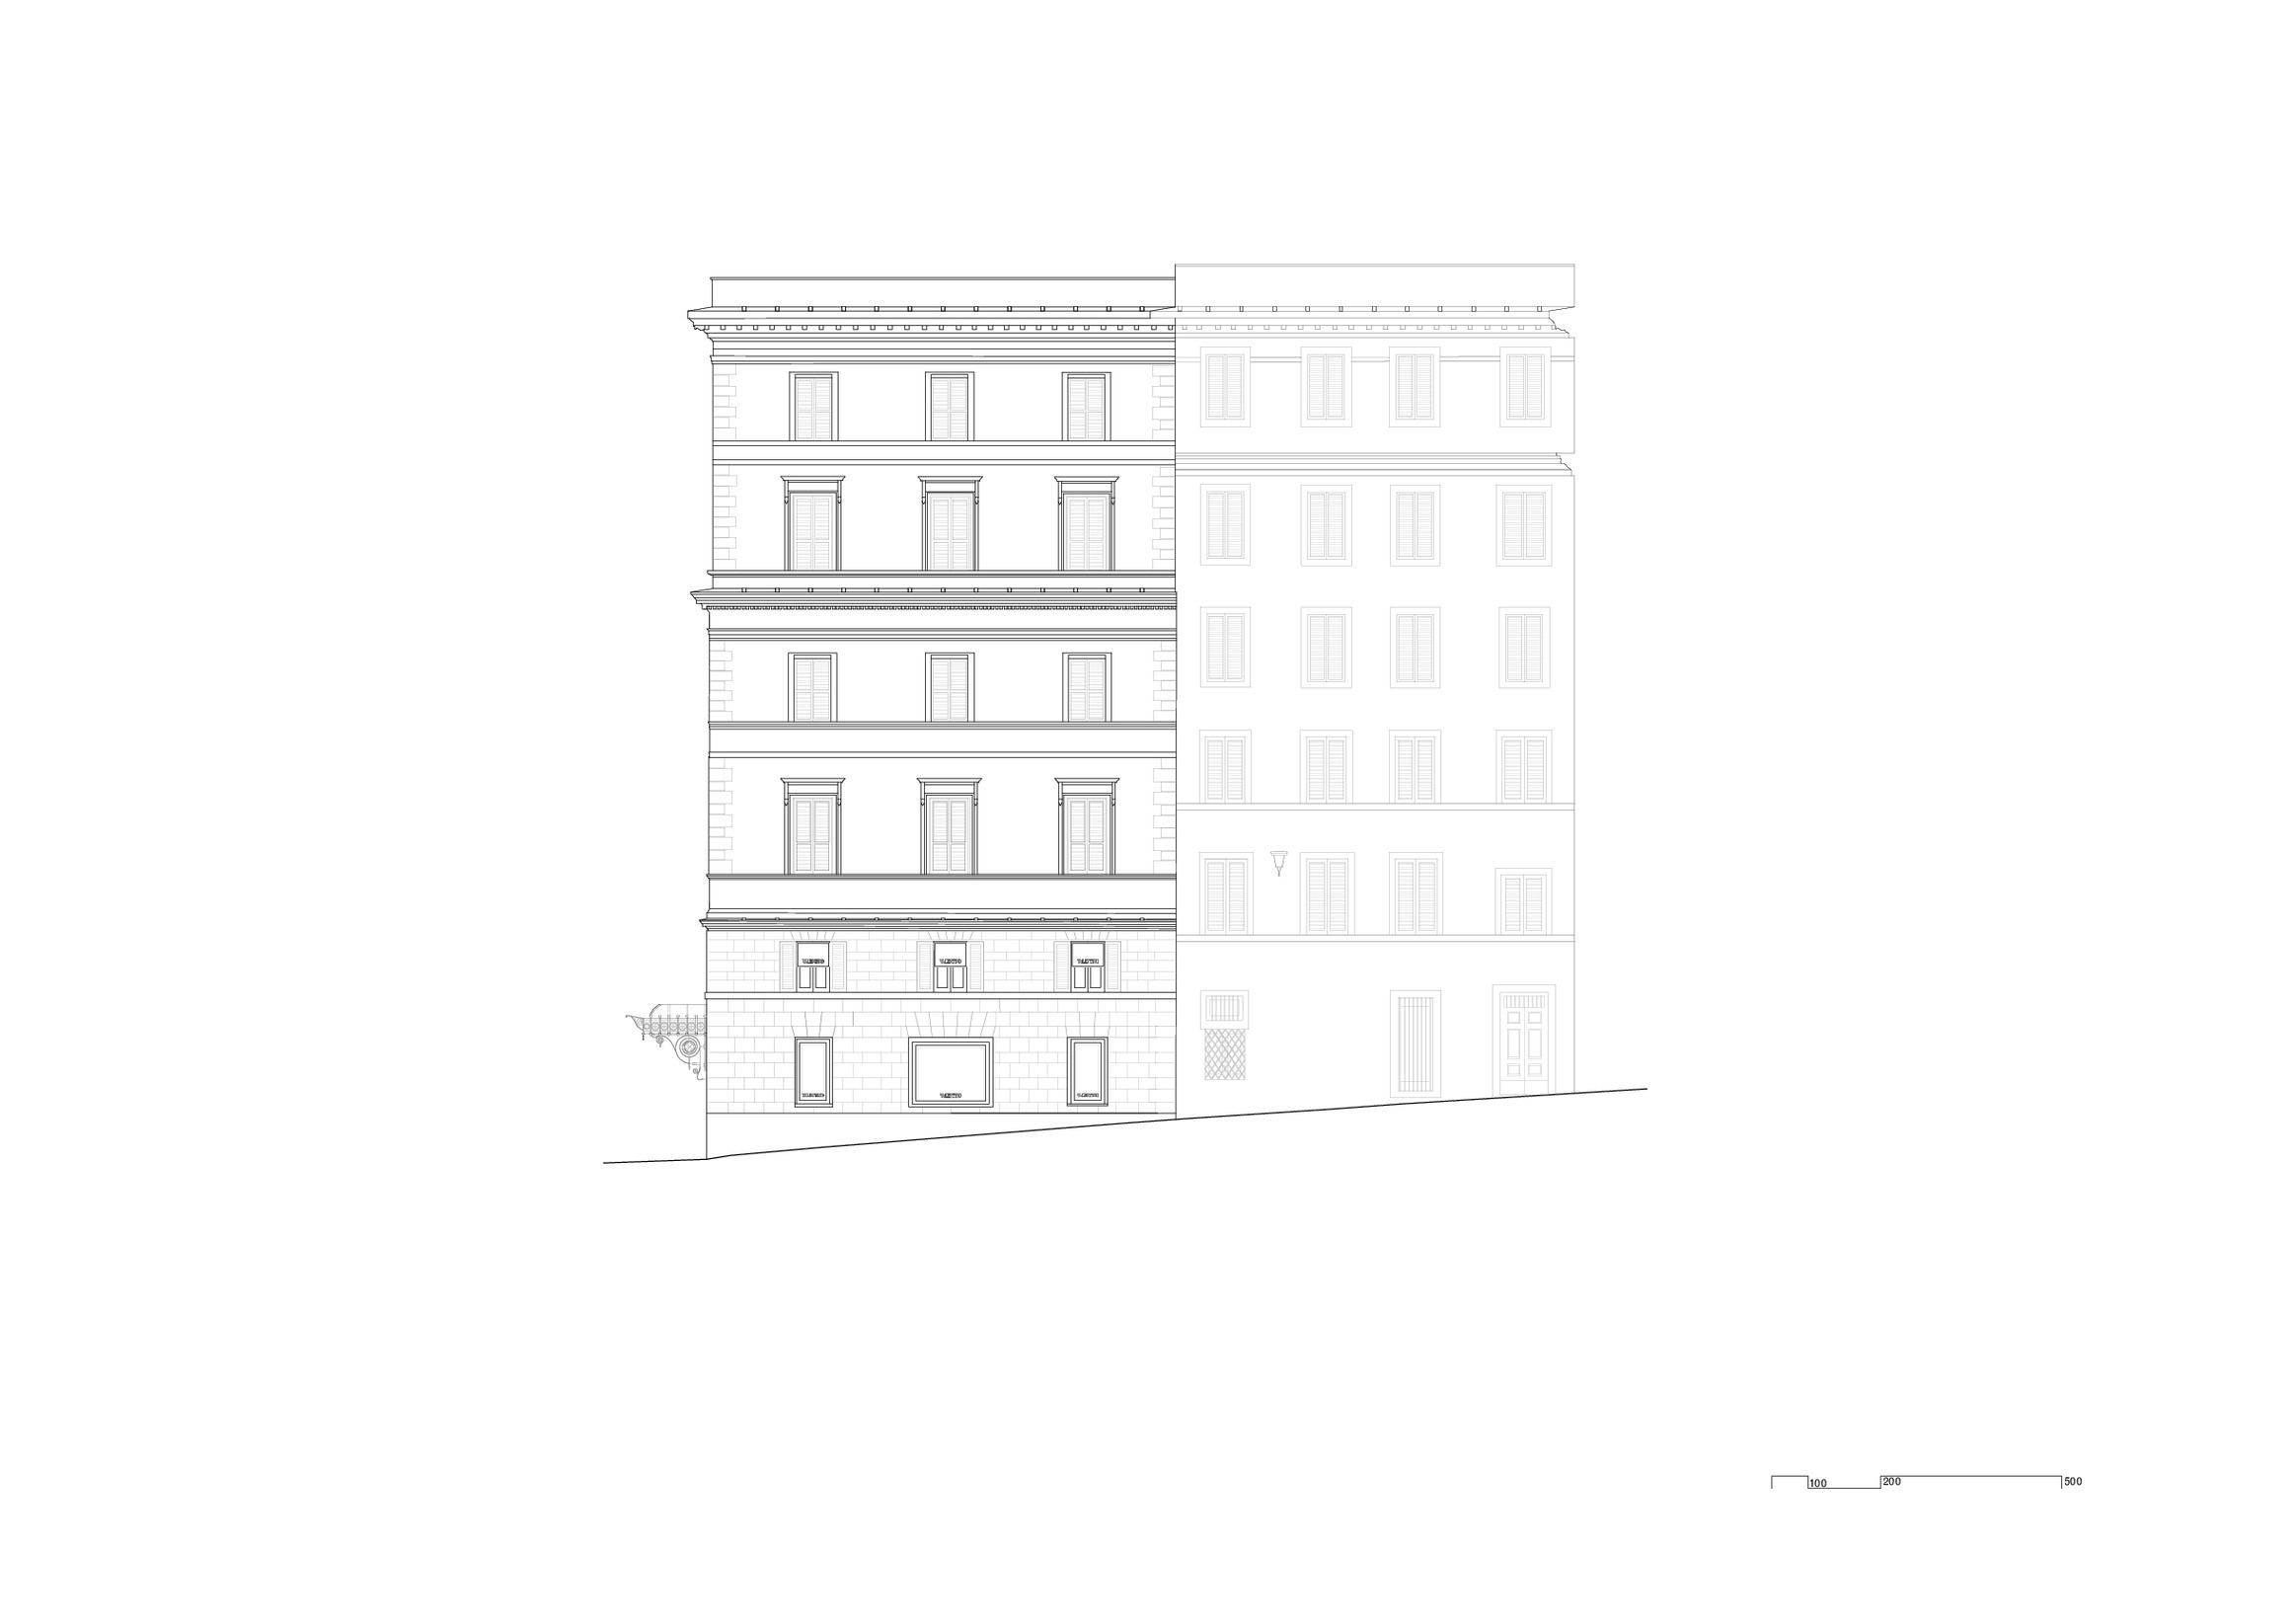 Valentino Flagship Store in Rome, Piazza di Spagna, East elevation.